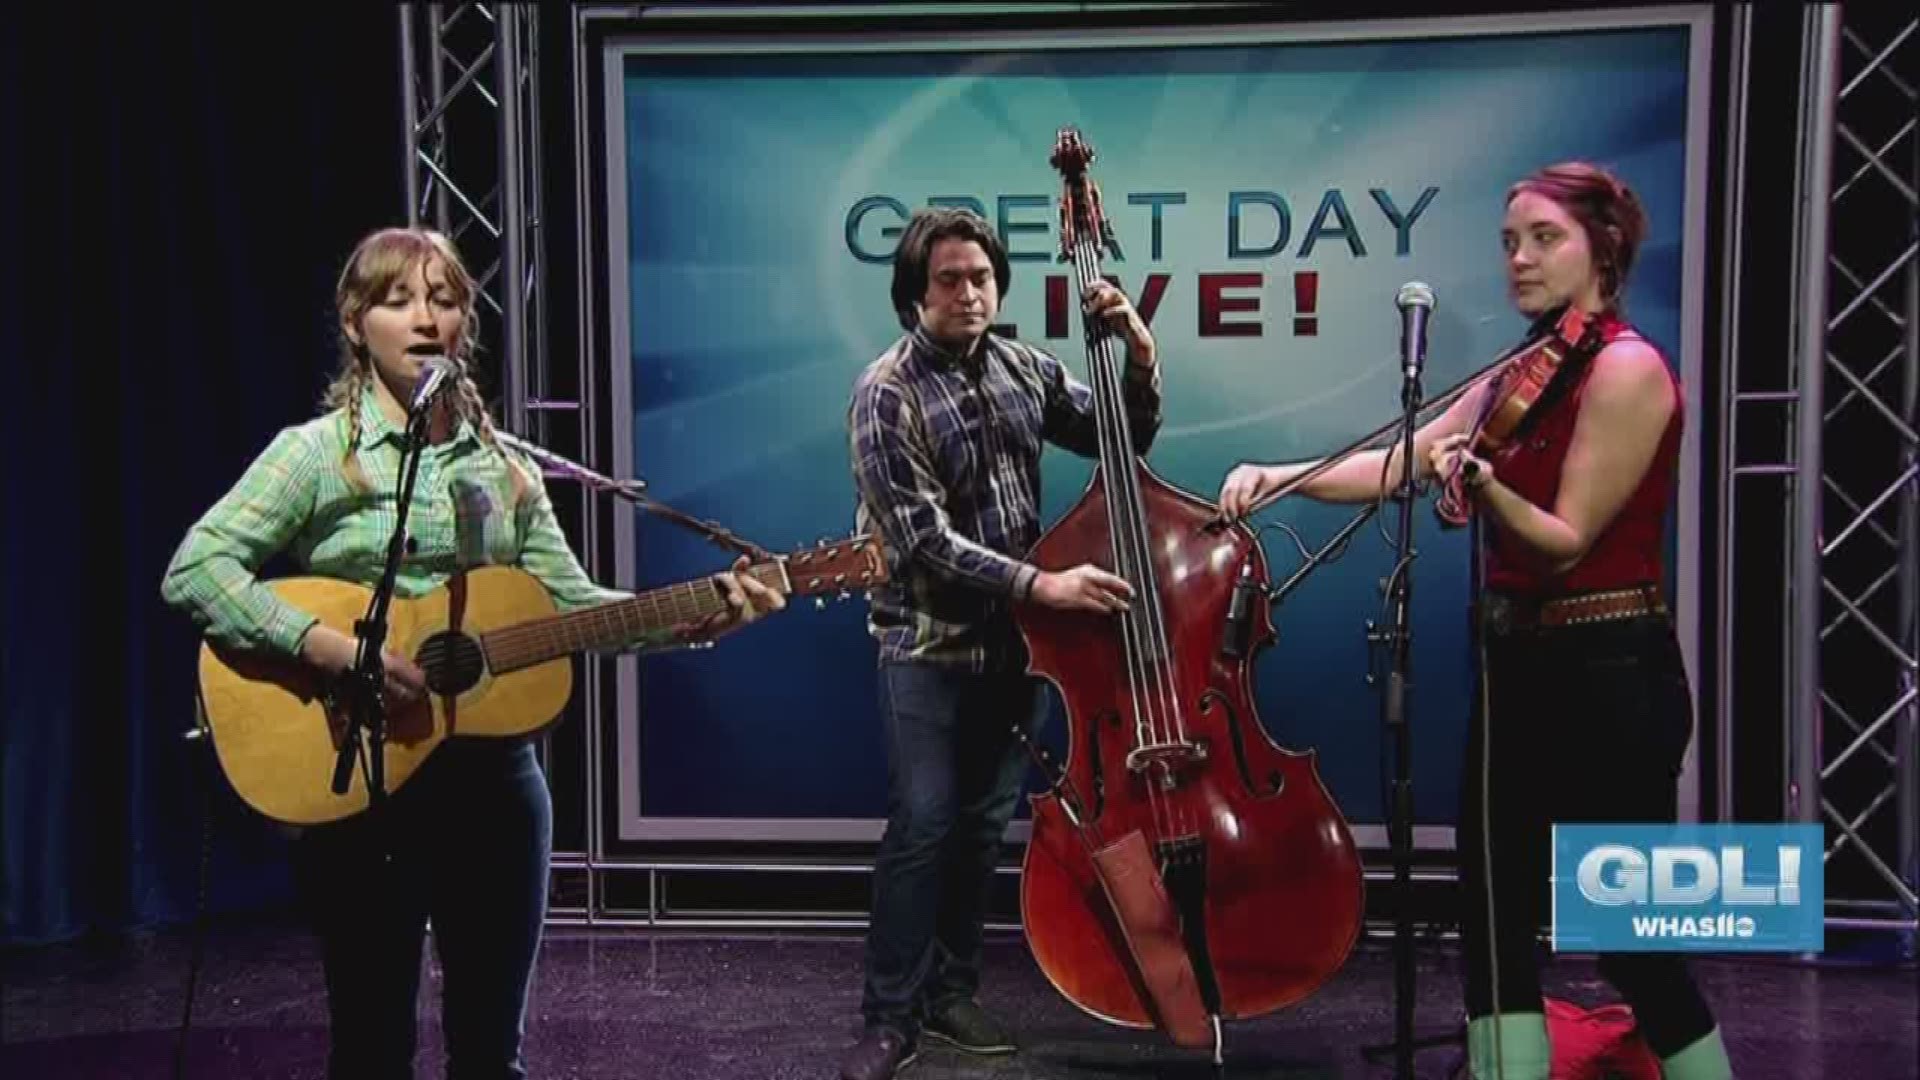 Members of Long Lost Country Band stopped by Great Day Live to talk about the upcoming Cover Up Concert Series that benefits the Salvation Army.